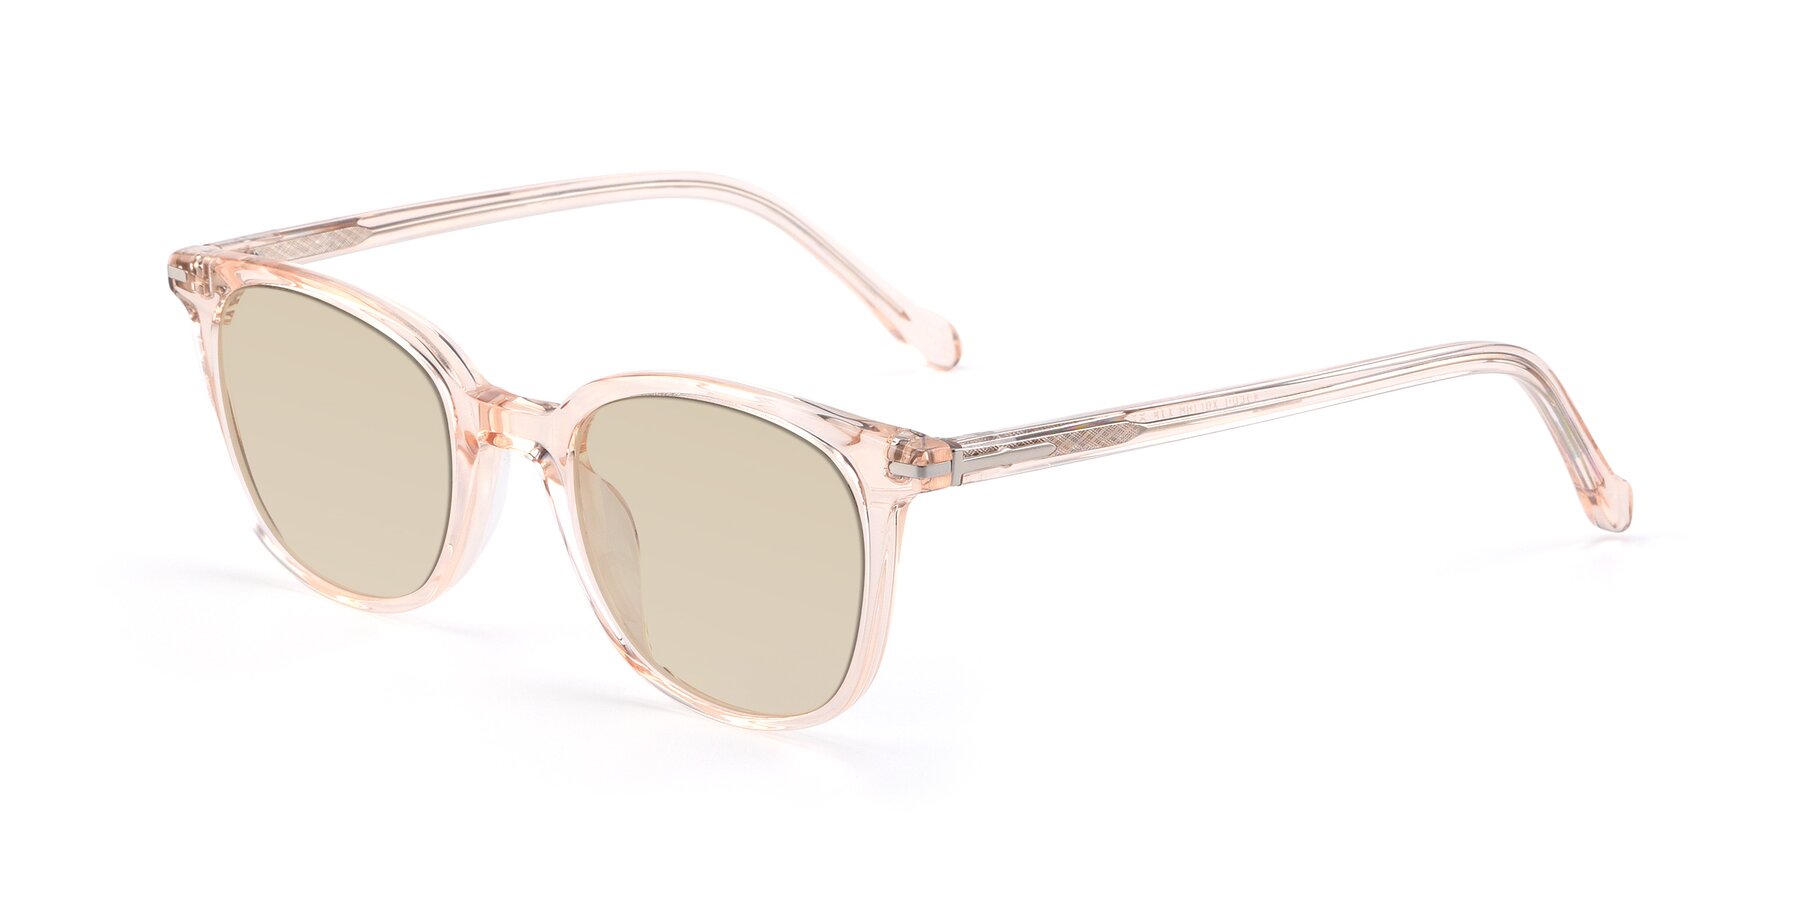 Angle of 17562 in Transparent Pink with Light Brown Tinted Lenses